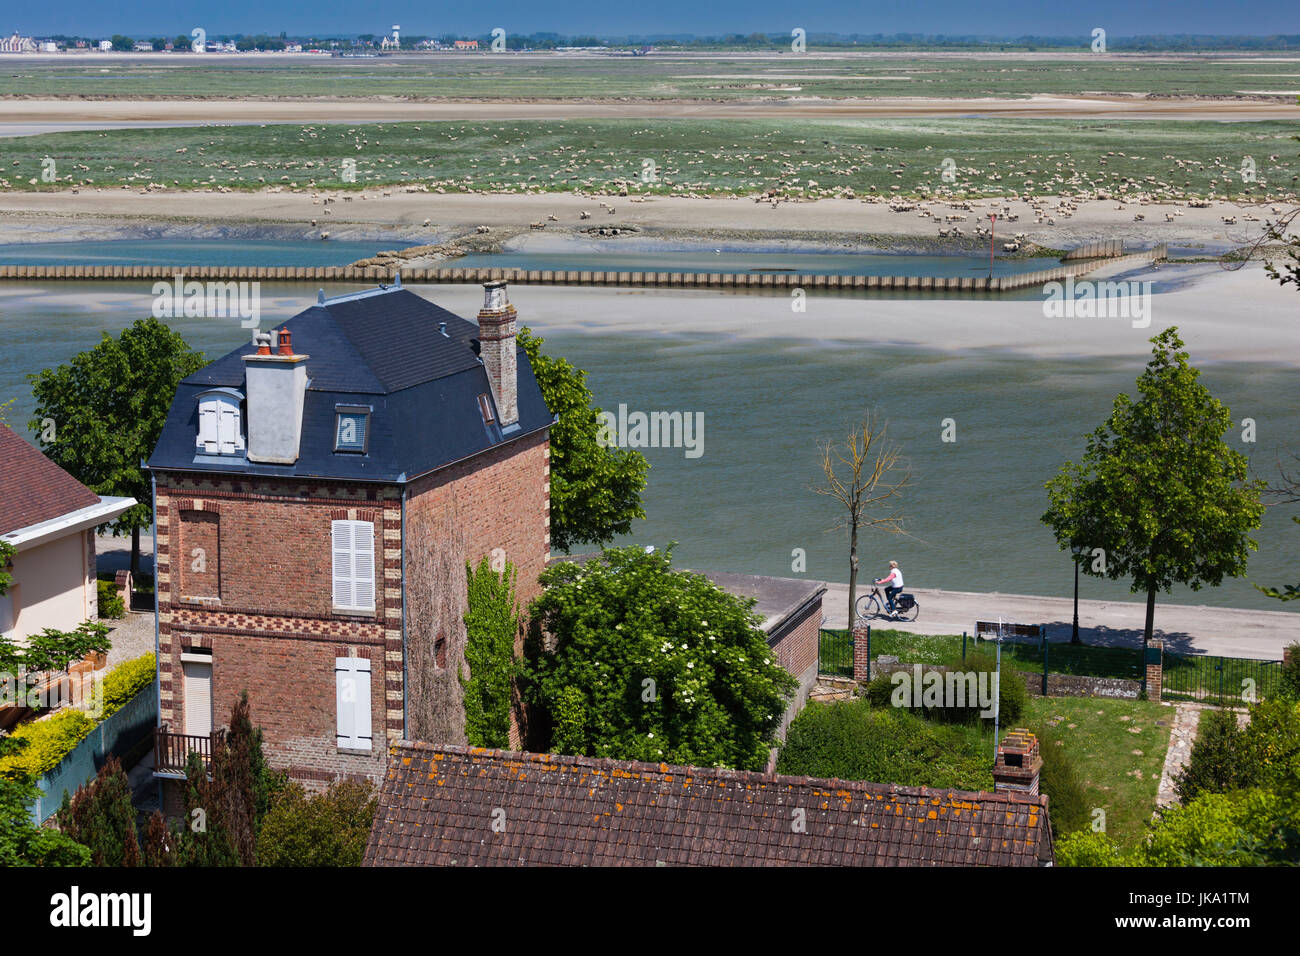 France, Picardy Region, Somme Department, St-Valery sur Somme, Somme Bay Resort town, elevated view of house by la Baie de Somme Stock Photo